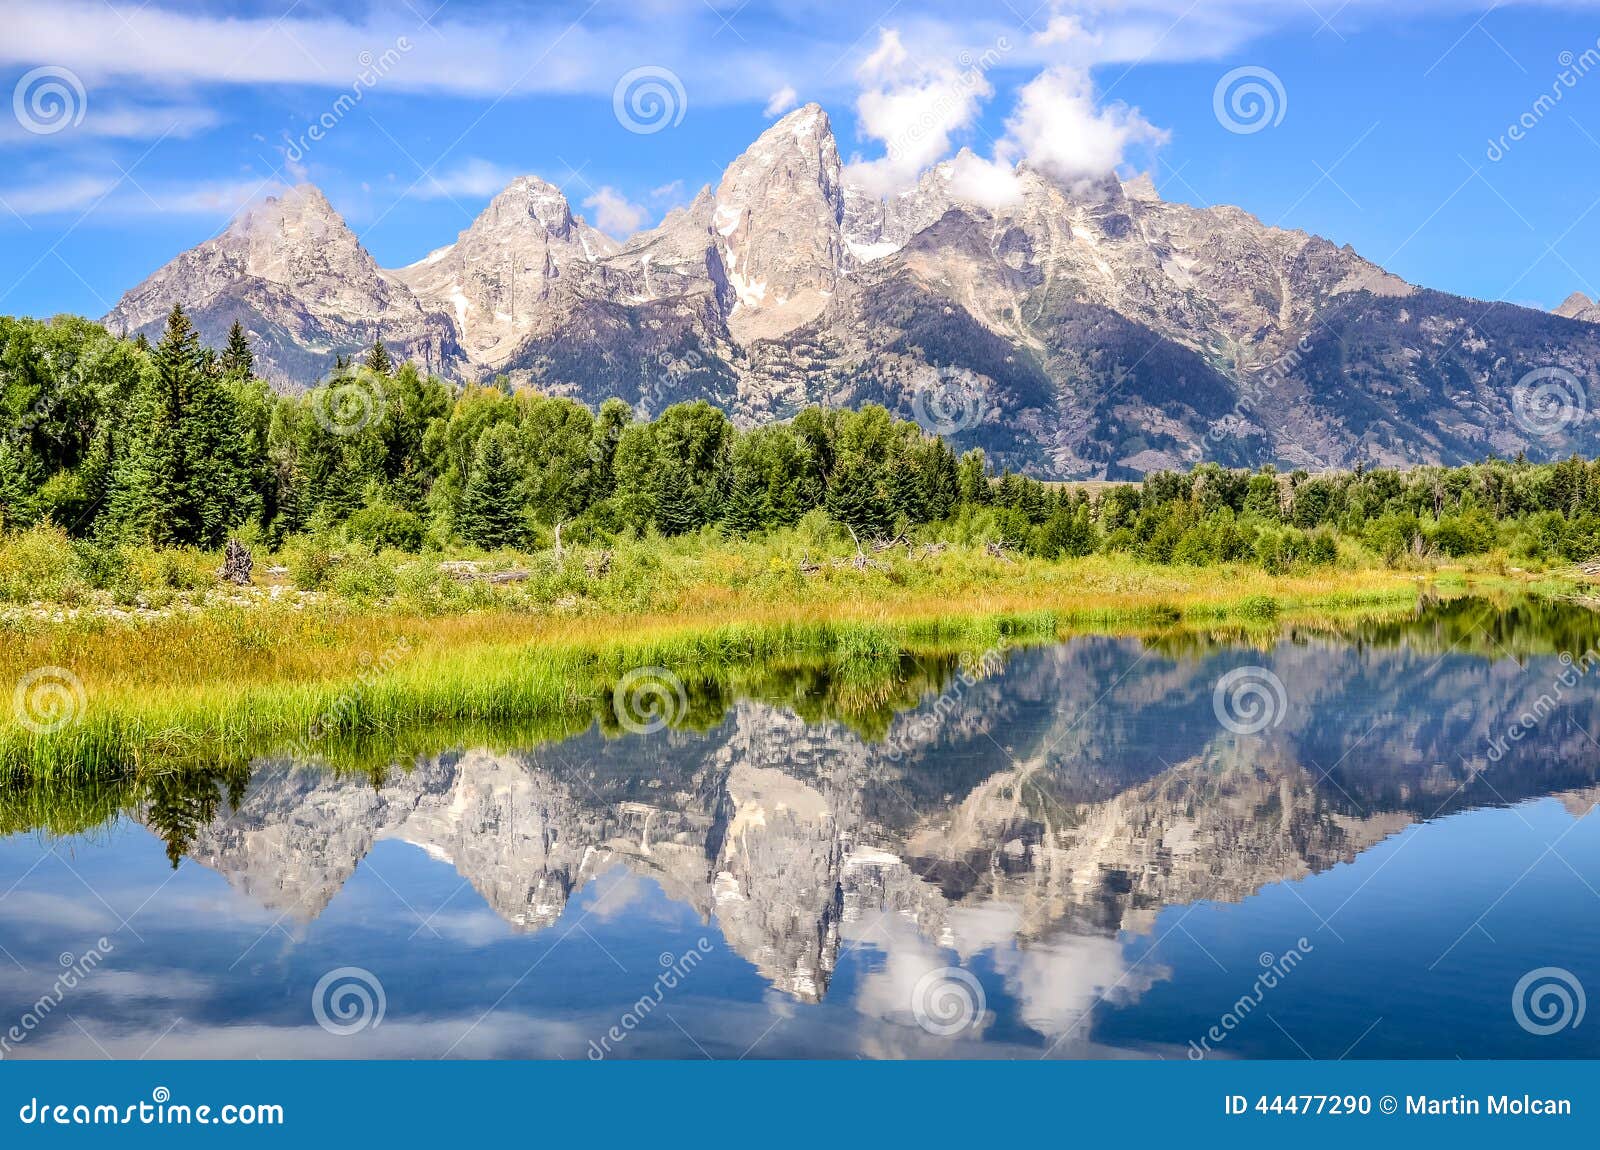 grand teton mountains landscape view with water reflection, usa